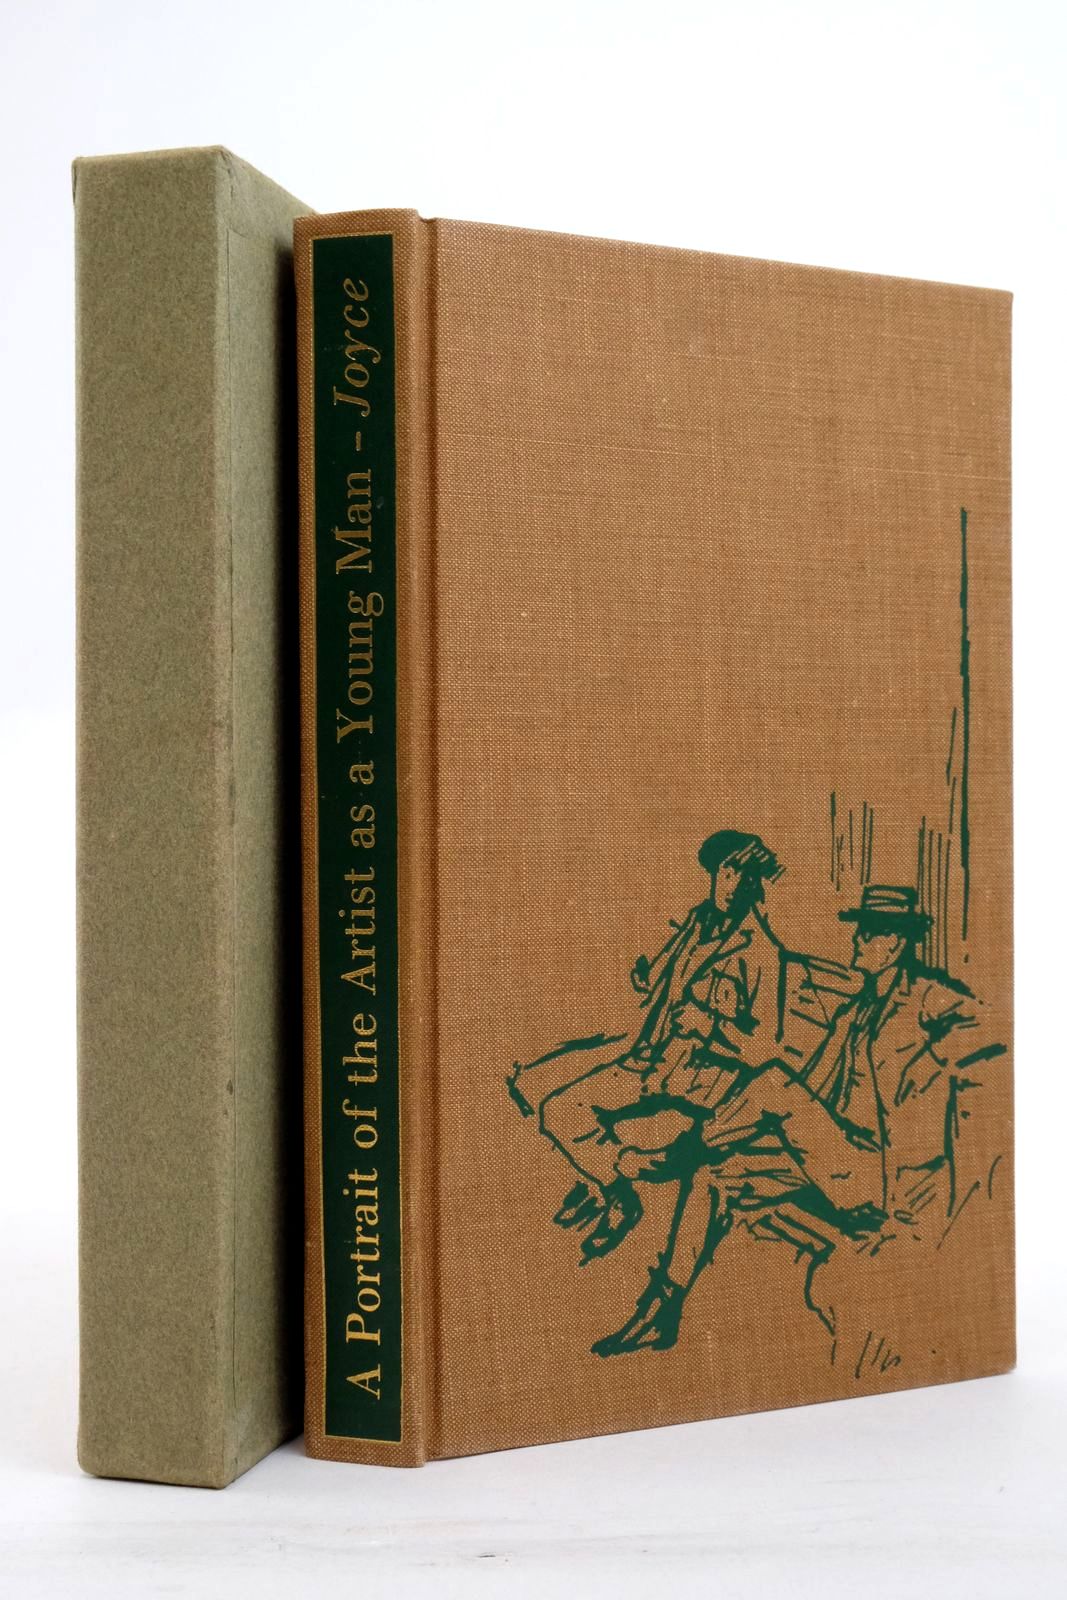 Photo of A PORTRAIT OF THE ARTIST AS A YOUNG MAN written by Joyce, James illustrated by Masterman, Dodie published by Folio Society (STOCK CODE: 2138199)  for sale by Stella & Rose's Books